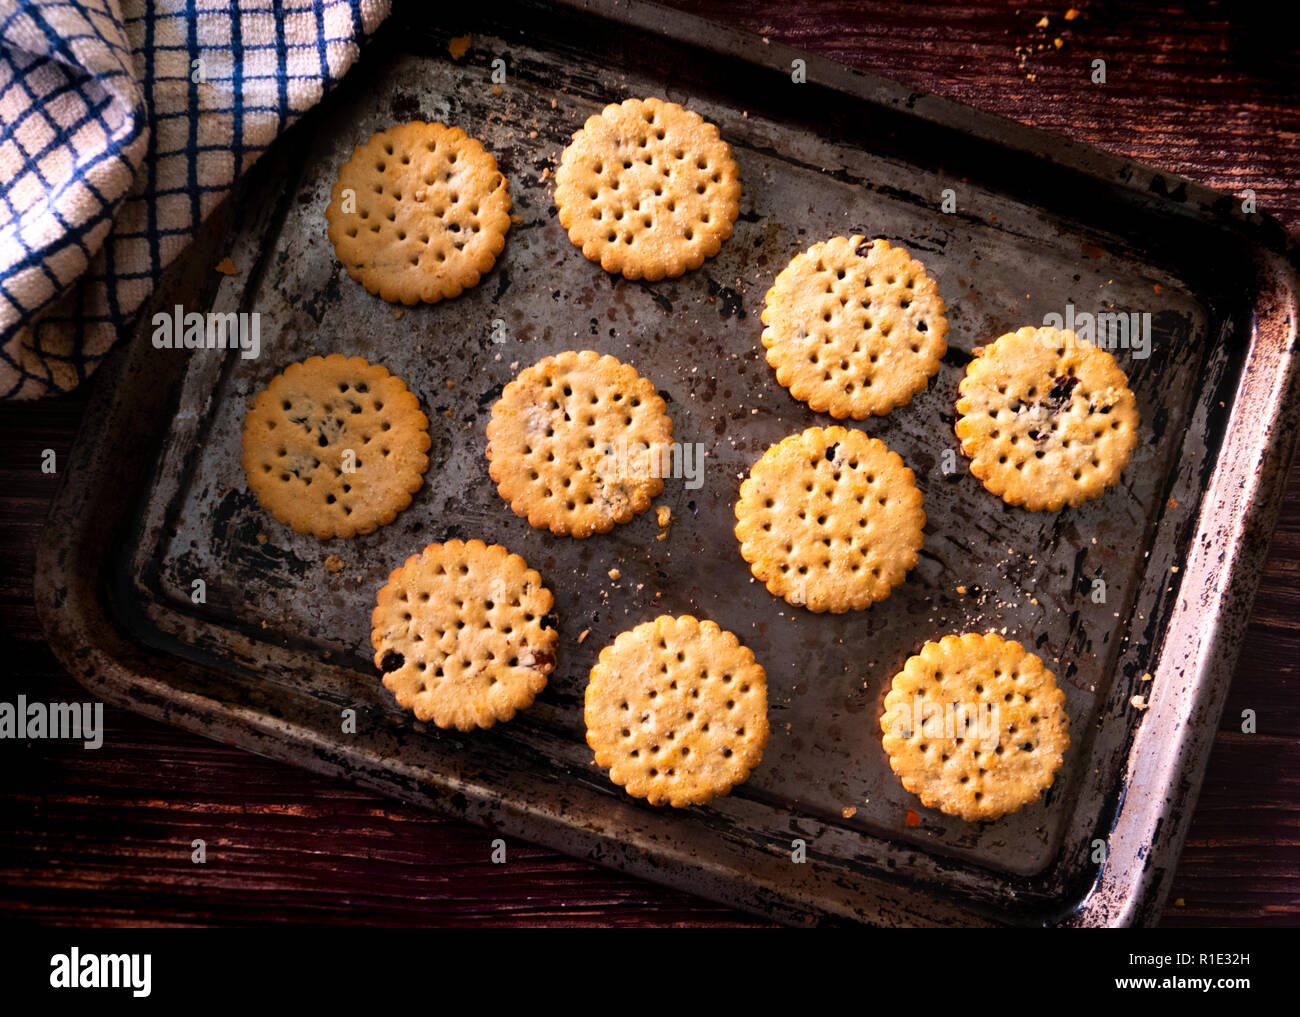 Fresh from the oven Biscuits on a baking tray Stock Photo - Alamy